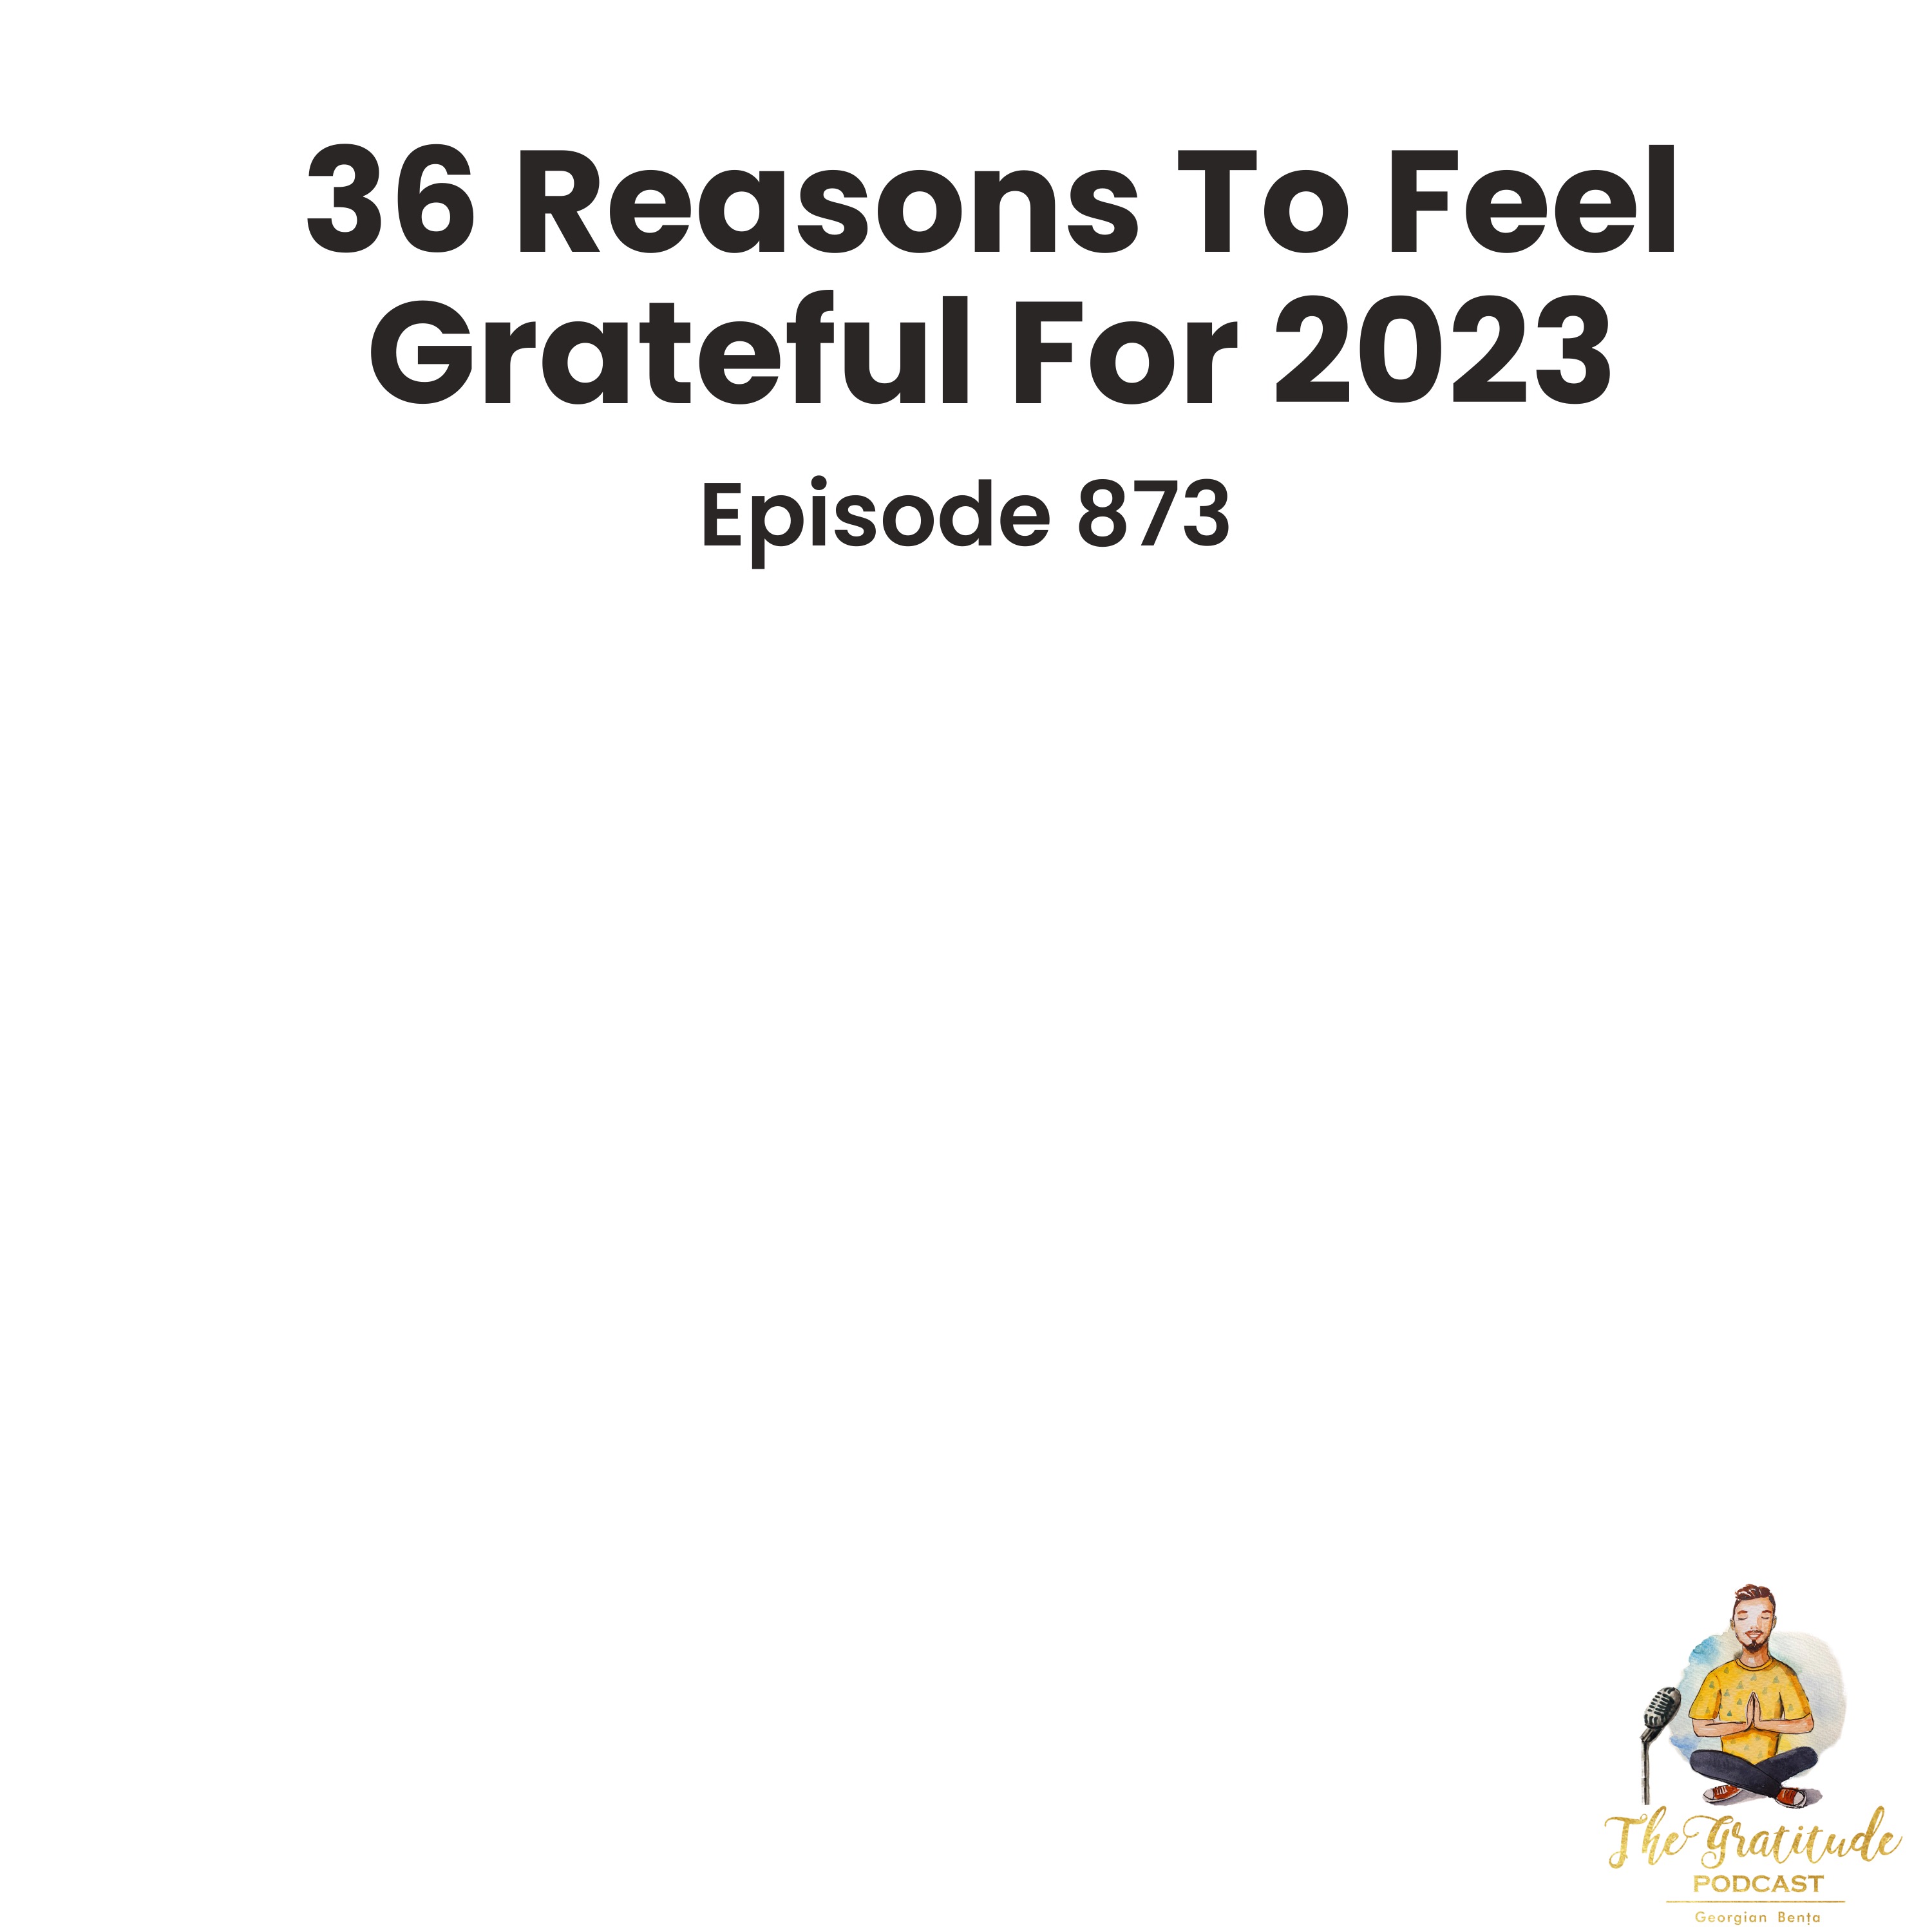 36 Reasons To Feel Grateful For 2023 (ep. 873)